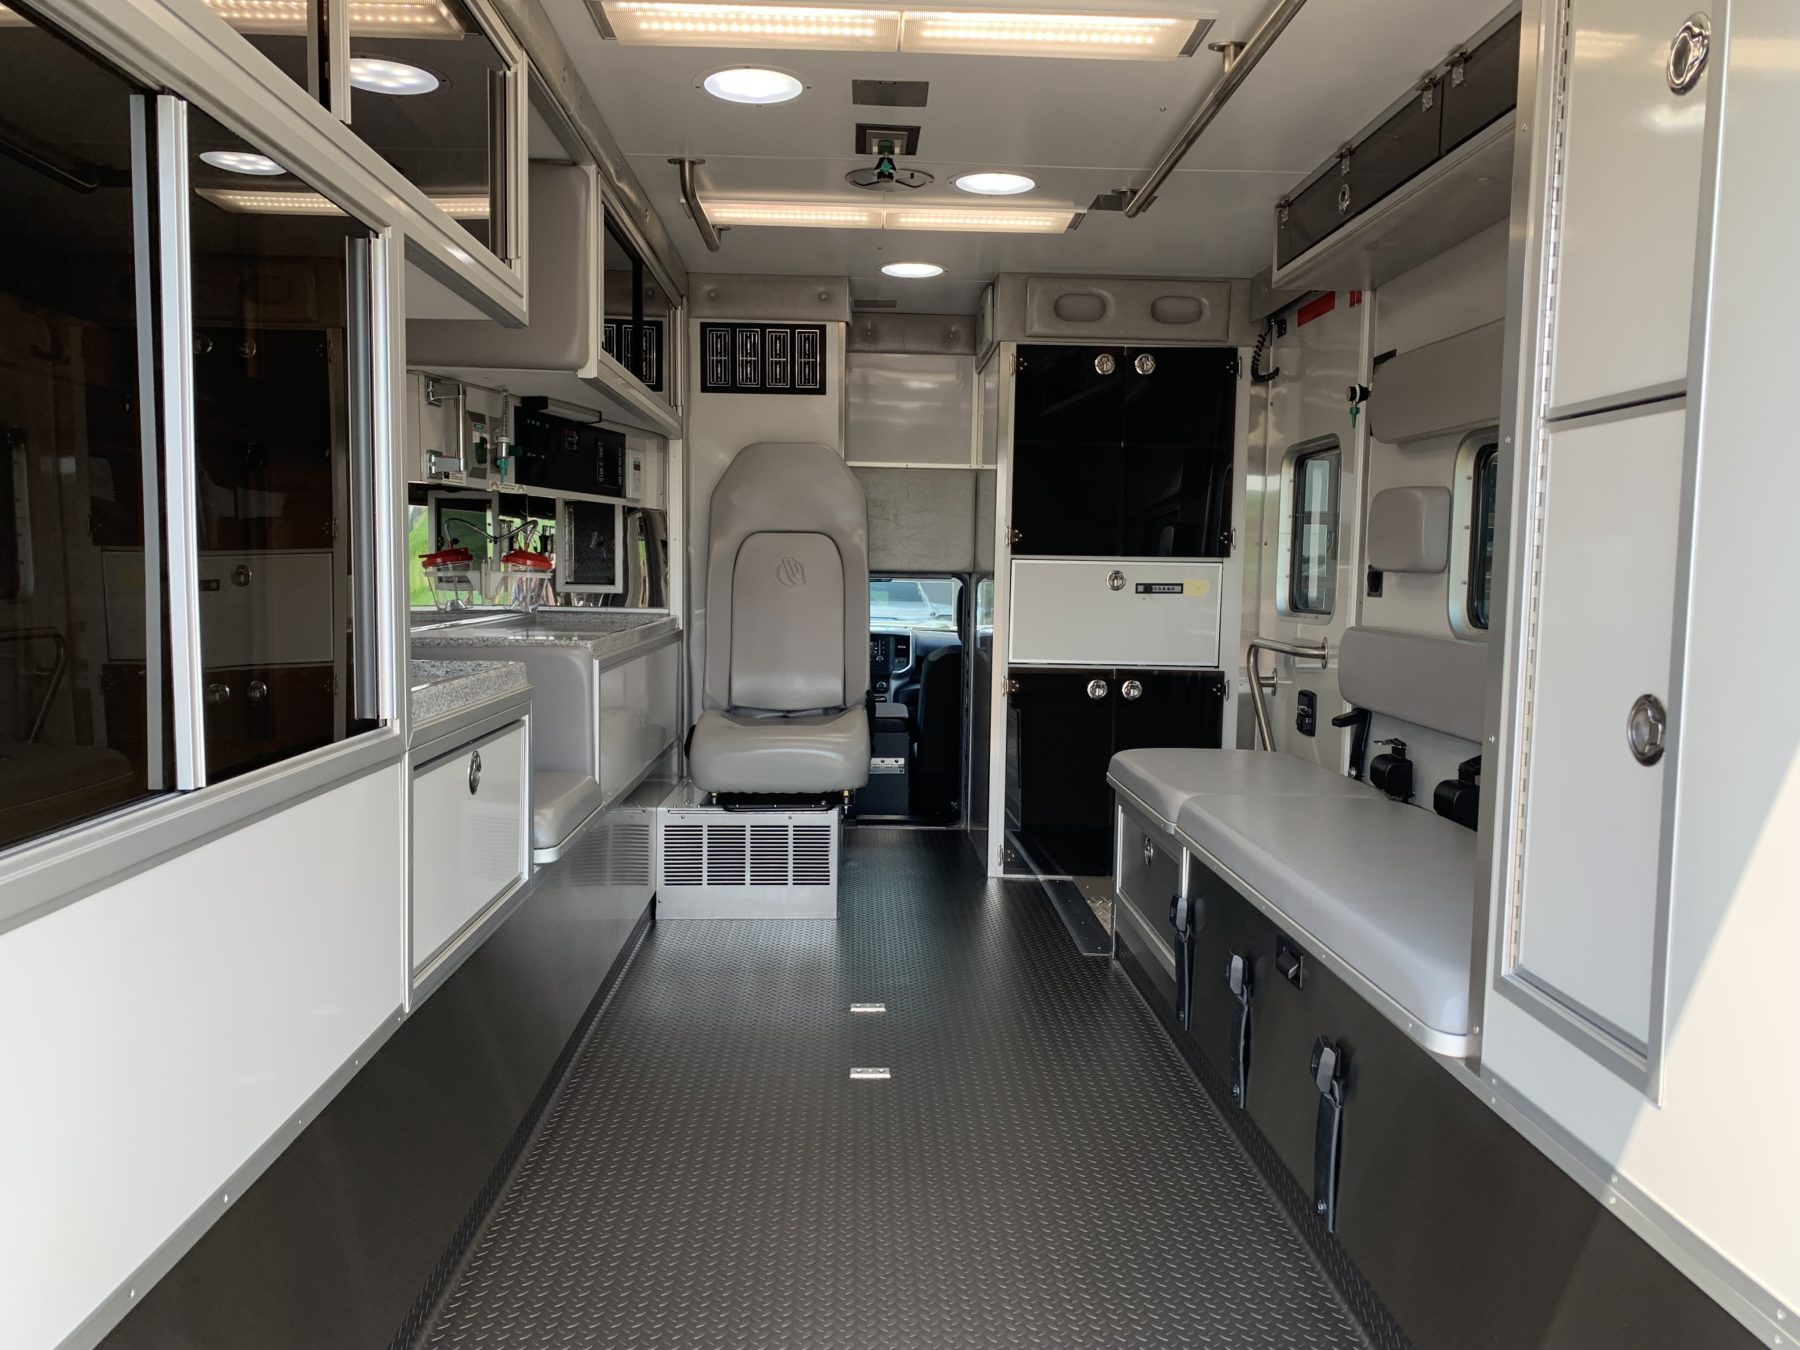 2021 Ram 4500 4x4 Heavy Duty Ambulance For Sale – Picture 2